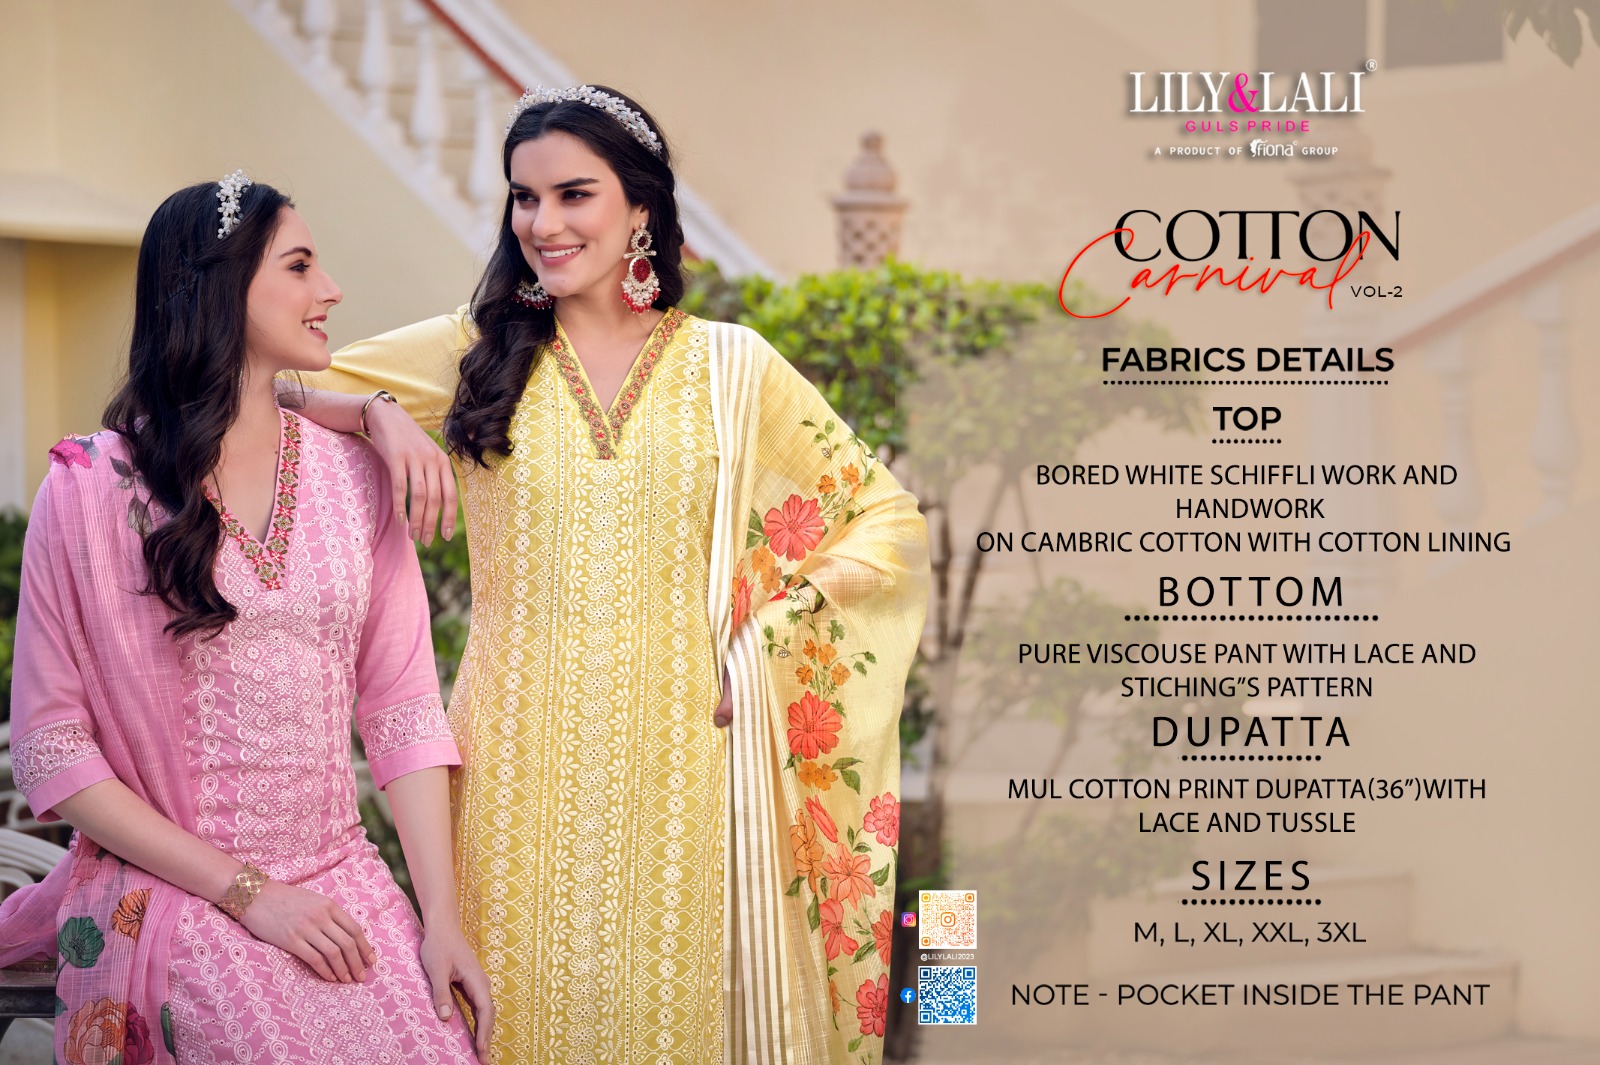 Lily And Lali Cotton Carnival Vol 2 collection 2